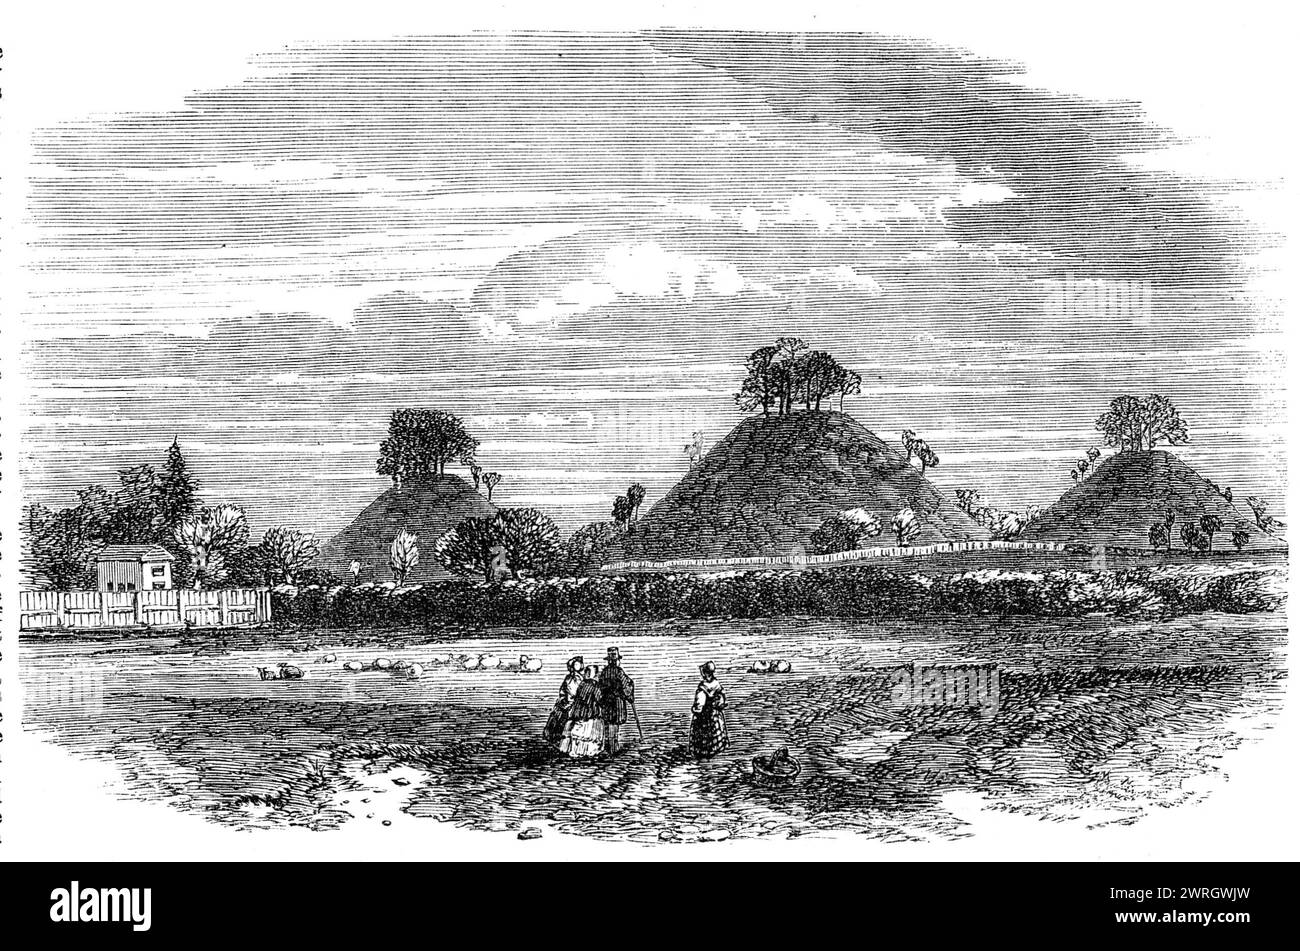 The Bartlow Hills (Grave Mounds of the Romans), Essex, 1864. Engraving from a photograph by Mr. G. Collins, of '...four tumuli, arranged in a row and varying in size, the largest being 142 ft. in diameter at the base and 44ft. high...Excavations...distinctly prove them to be Roman works. Many curious and valuable sepulchral relics were discovered in them, but they were unfortunately lost in the fire which burned down Easton Lodge, near Dunmow, the seat of Viscount Maynard, on whose estates the hills are situated. It was feared that these venerable landmarks were condemned to destruction in ord Stock Photo